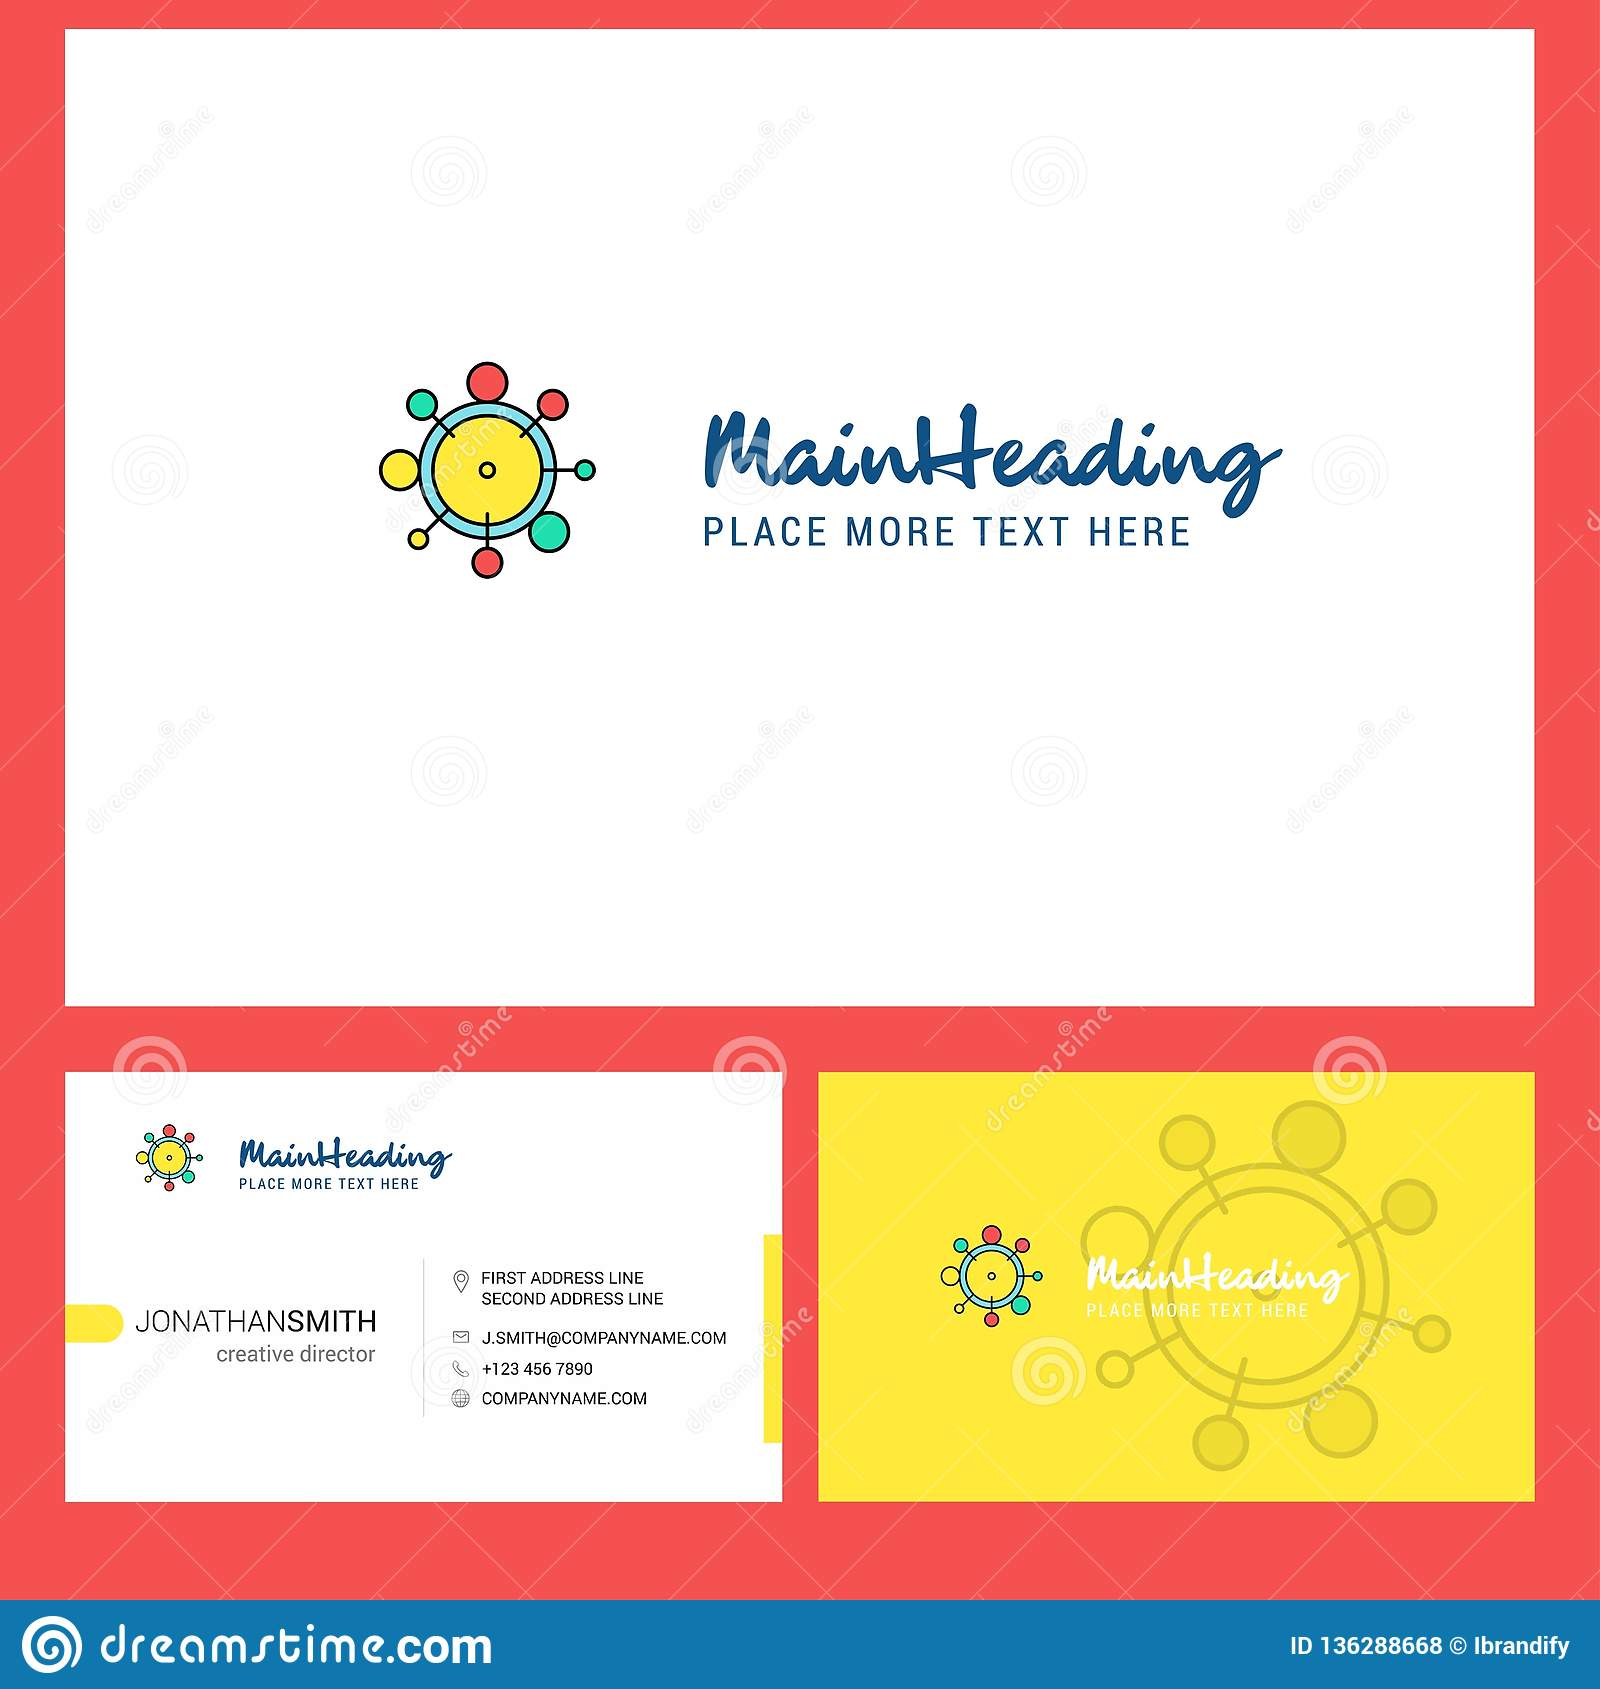 Chemical Bonding Logo Design With Tagline & Front And Back Regarding Medication Card Template